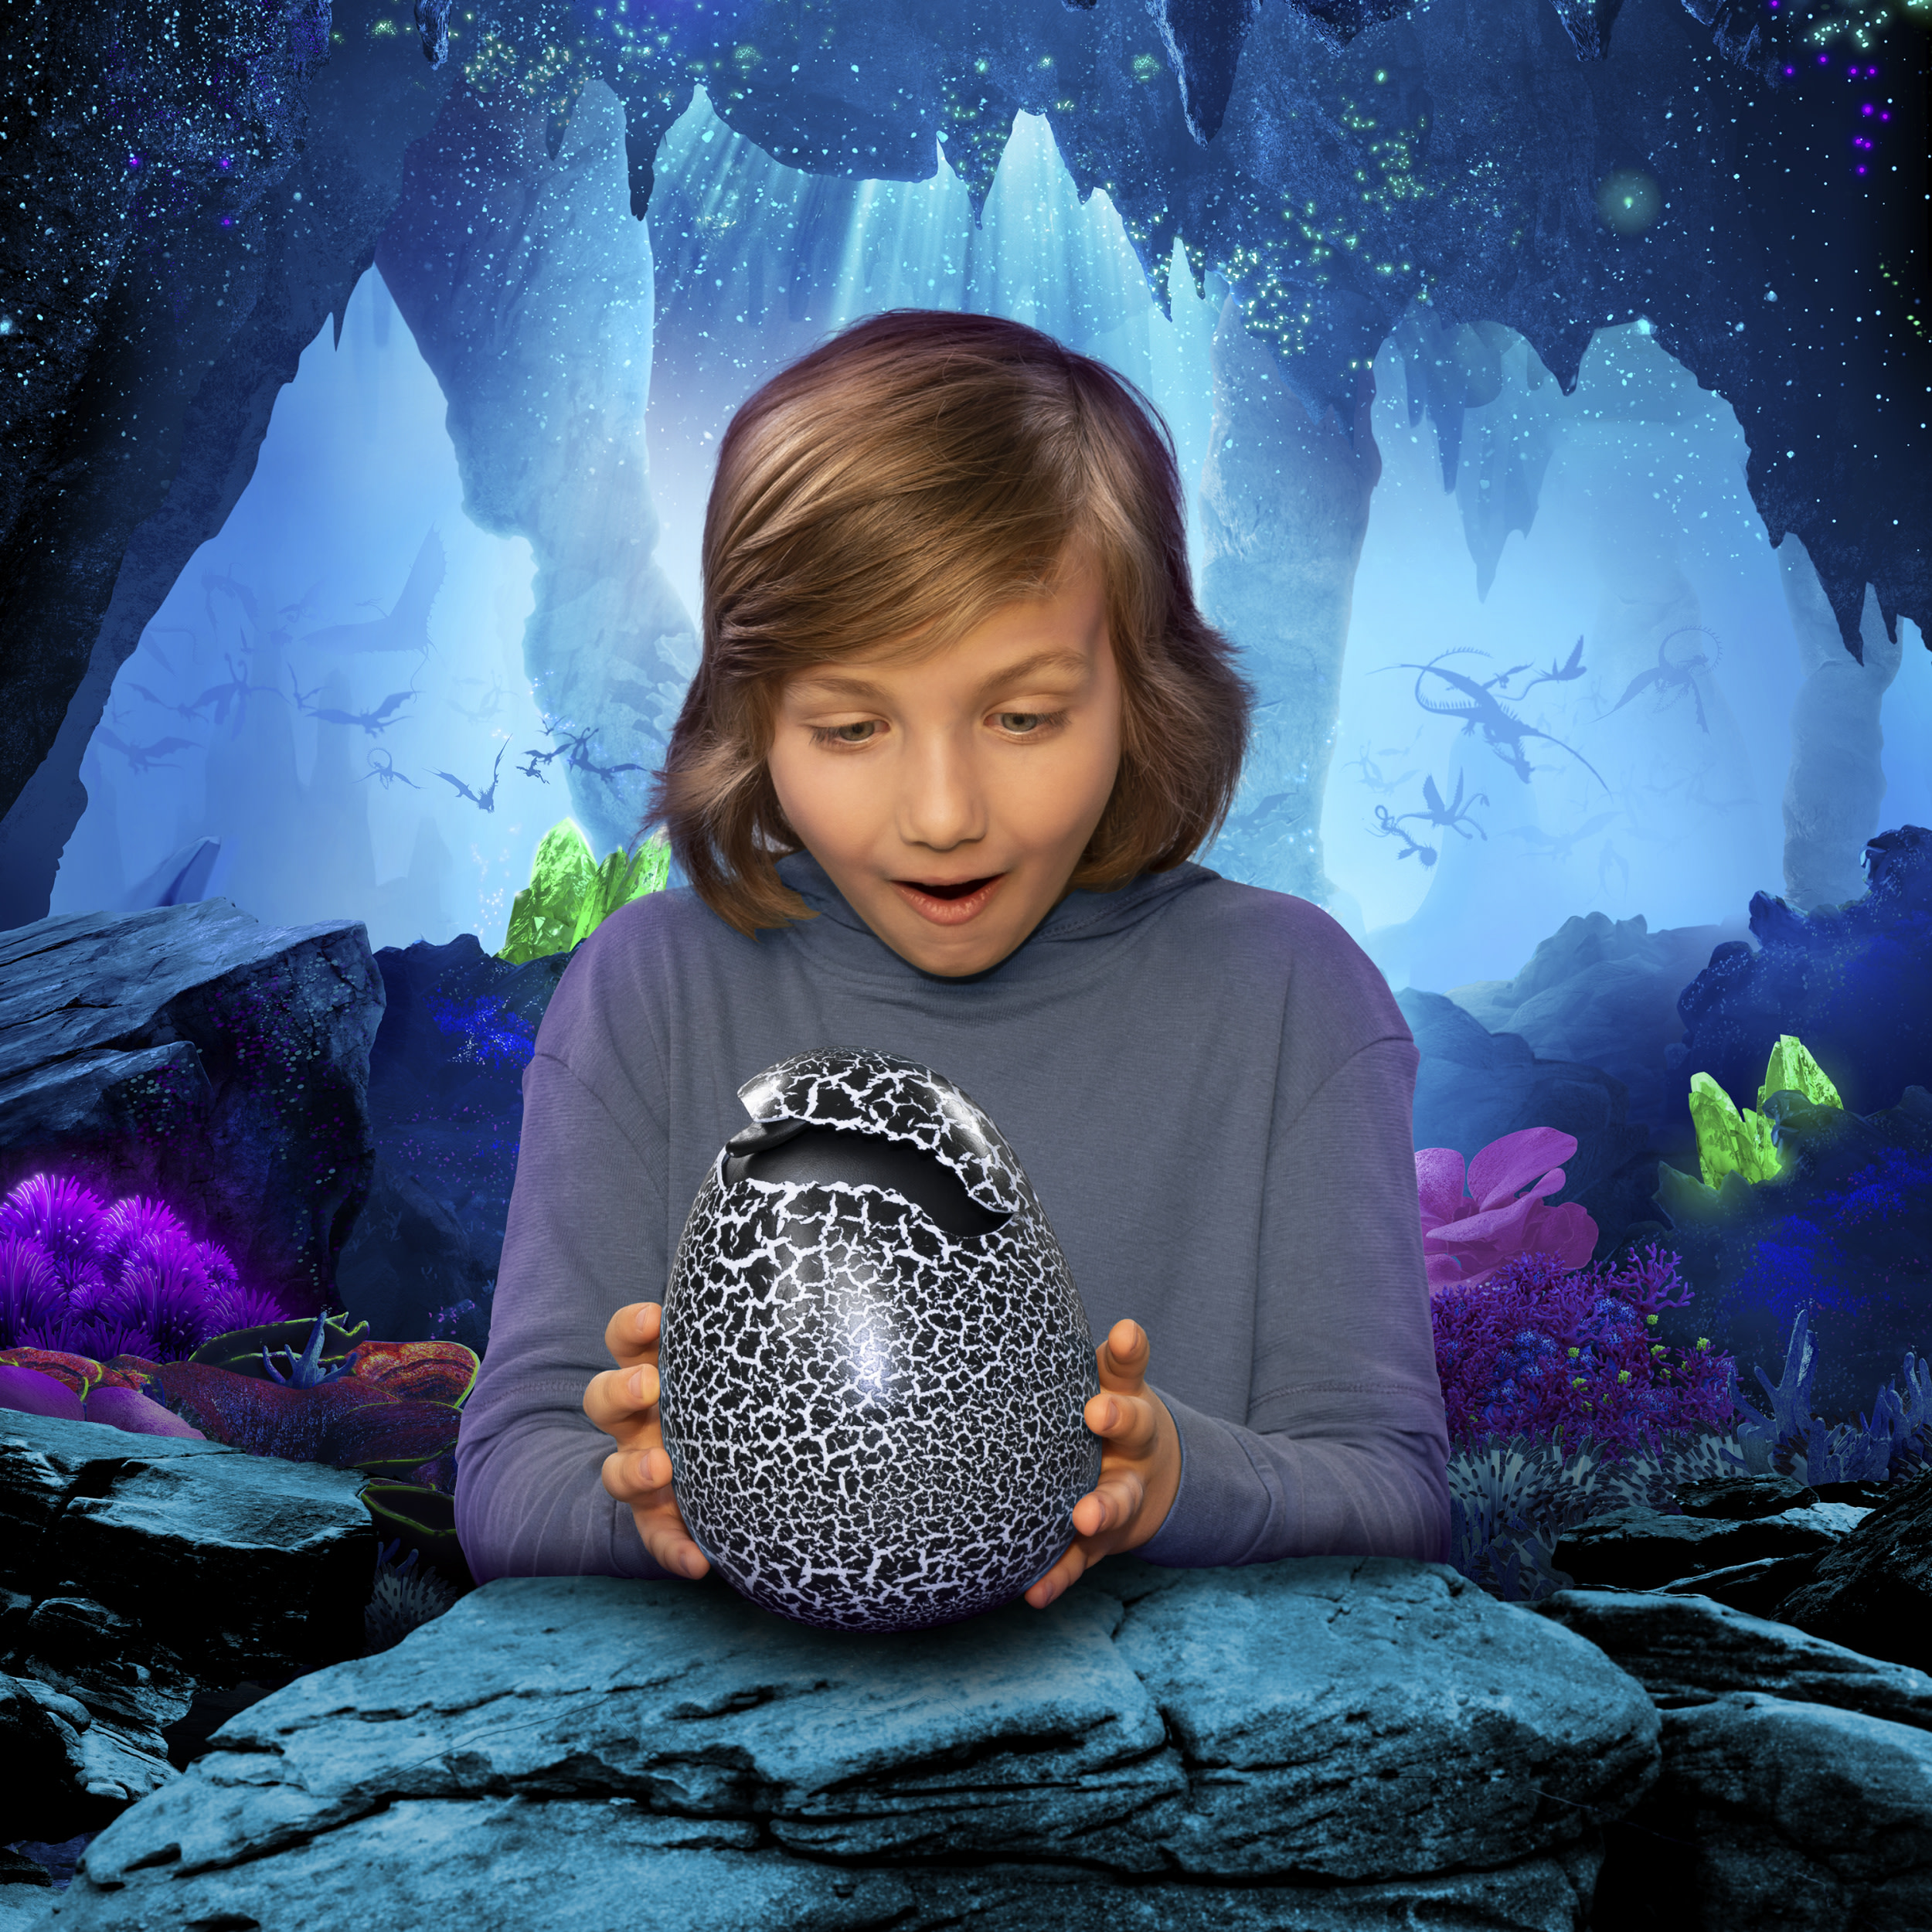 DreamWorks Dragons, Hatching Toothless Interactive Baby Dragon and Bonus Downloadable Episodes - image 4 of 8